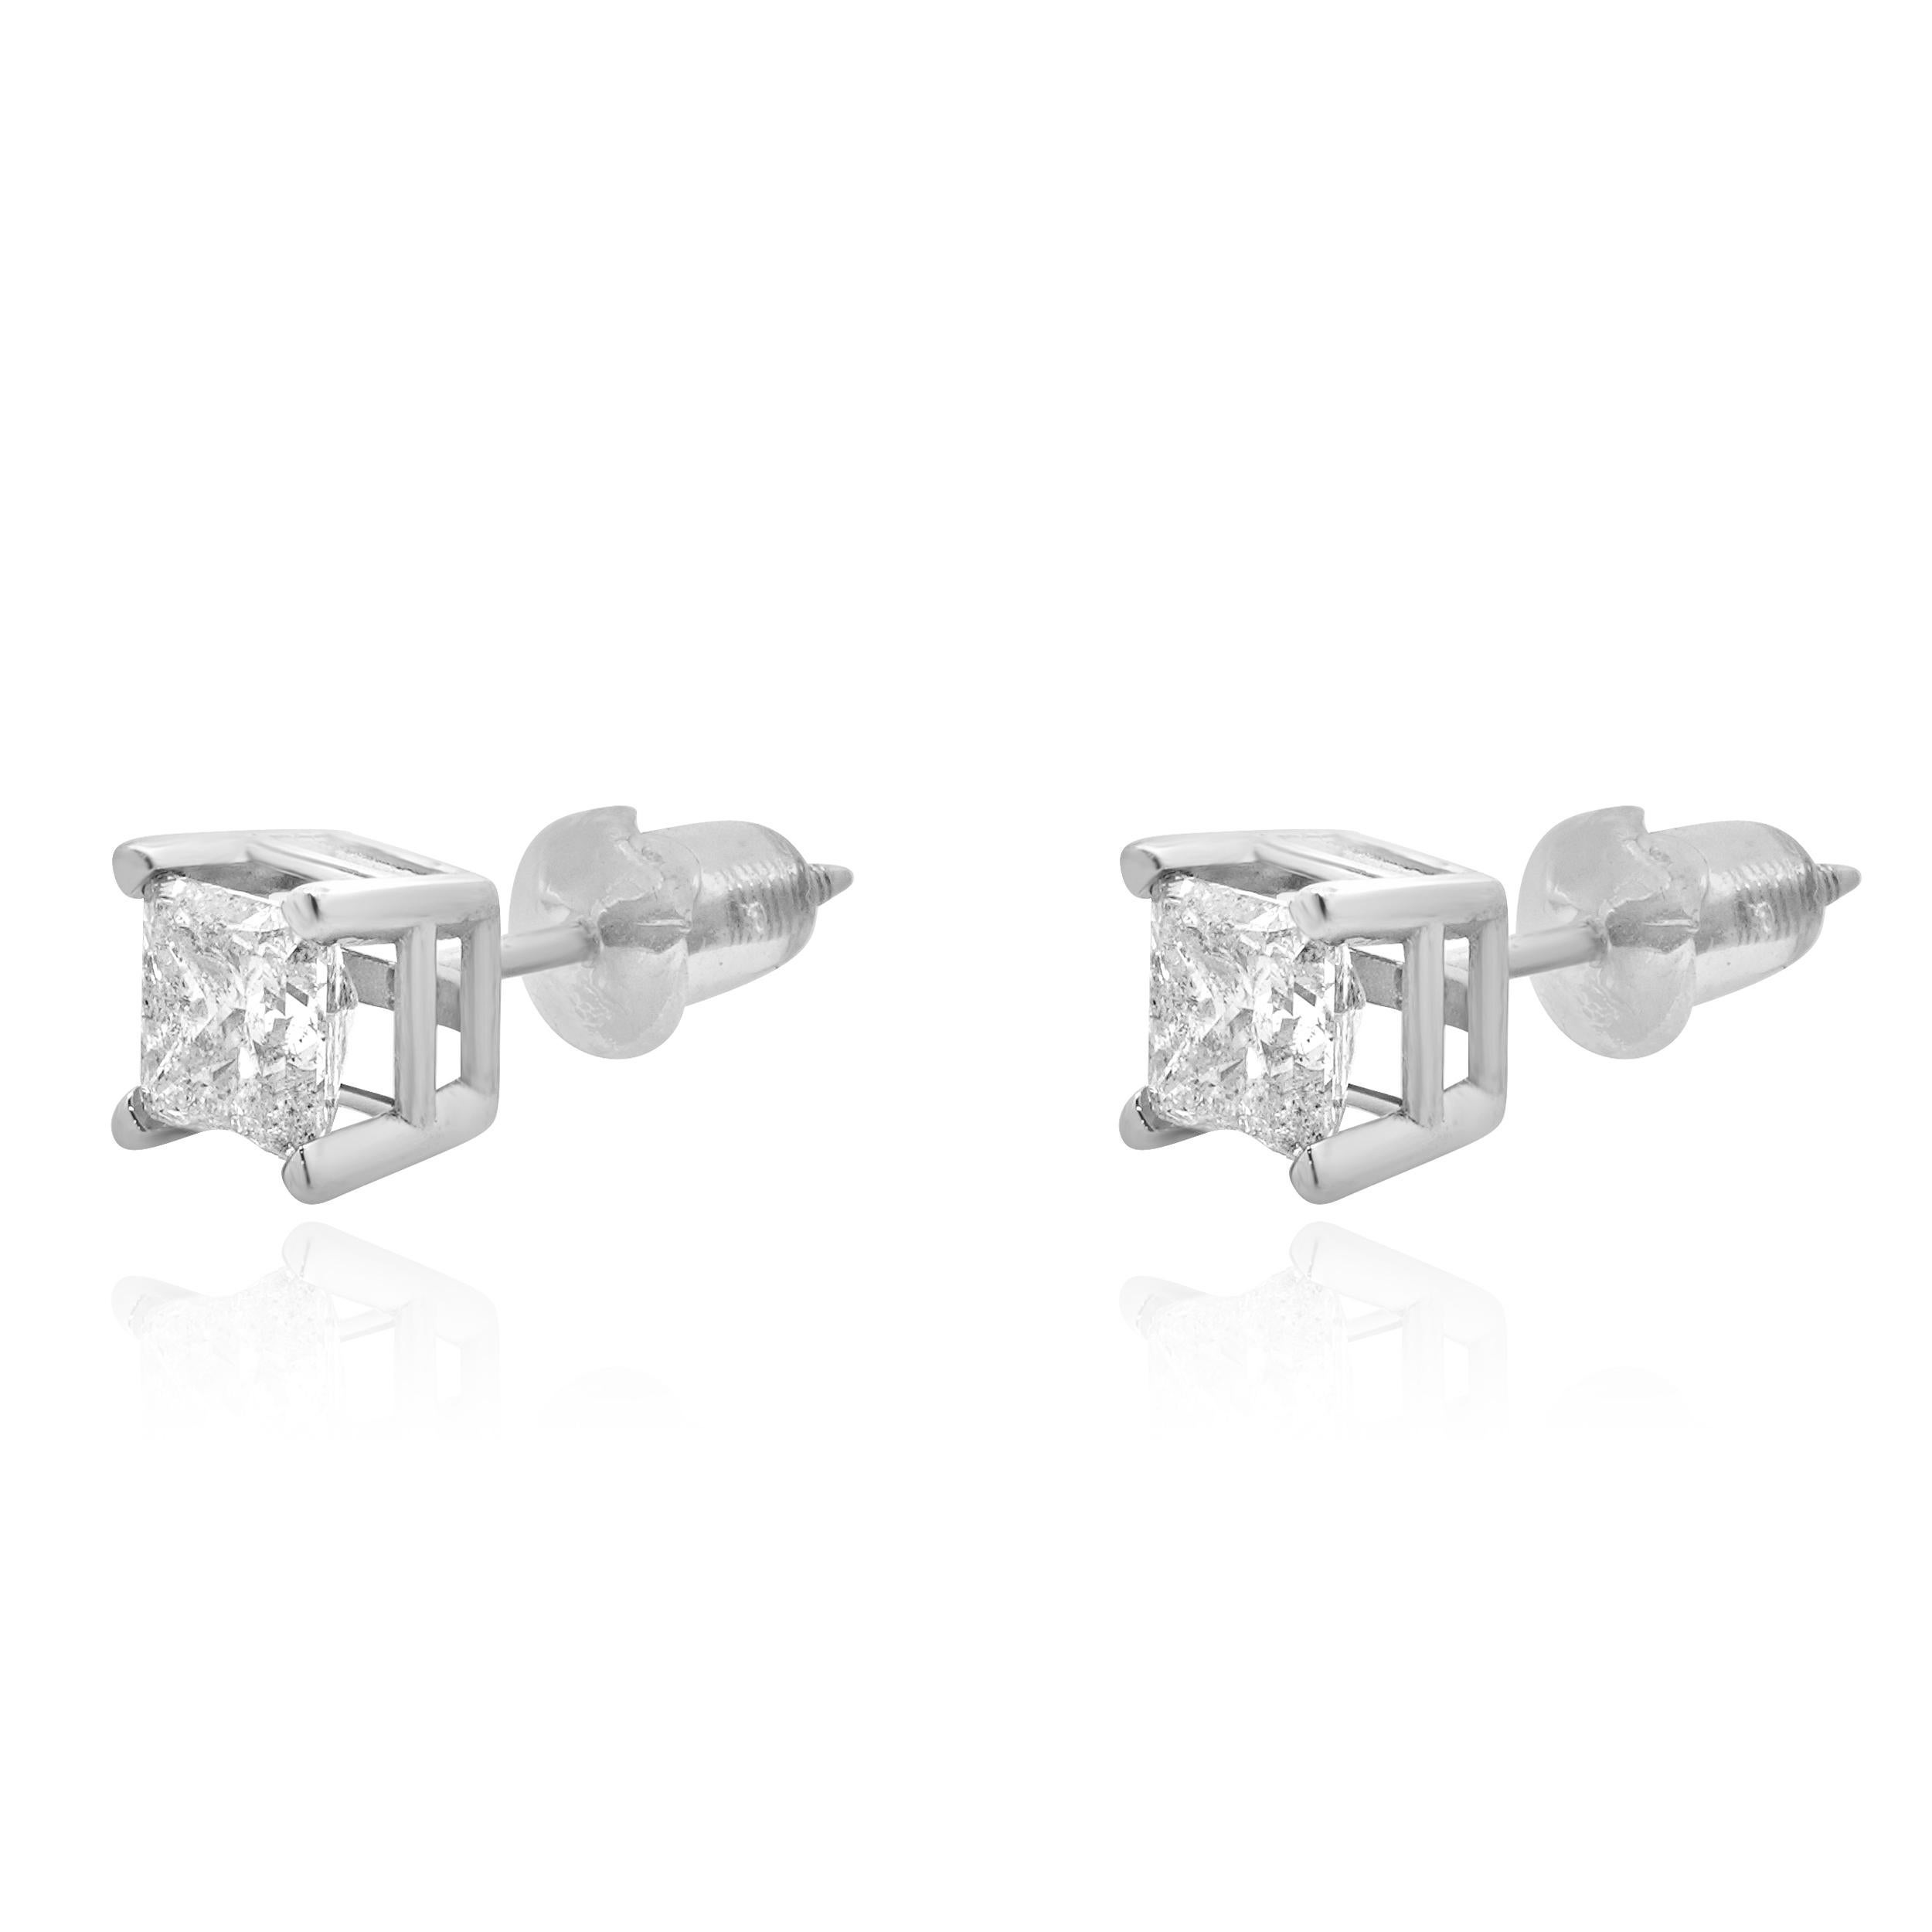 Material: 14K white gold
Diamonds: 2 princess cut = 1.00cttw
Color: H
Clarity: I1-2
Dimensions: earrings measure approximately 5.72mm in diameter
Fastenings: screw backs
Weight: 0.89 grams